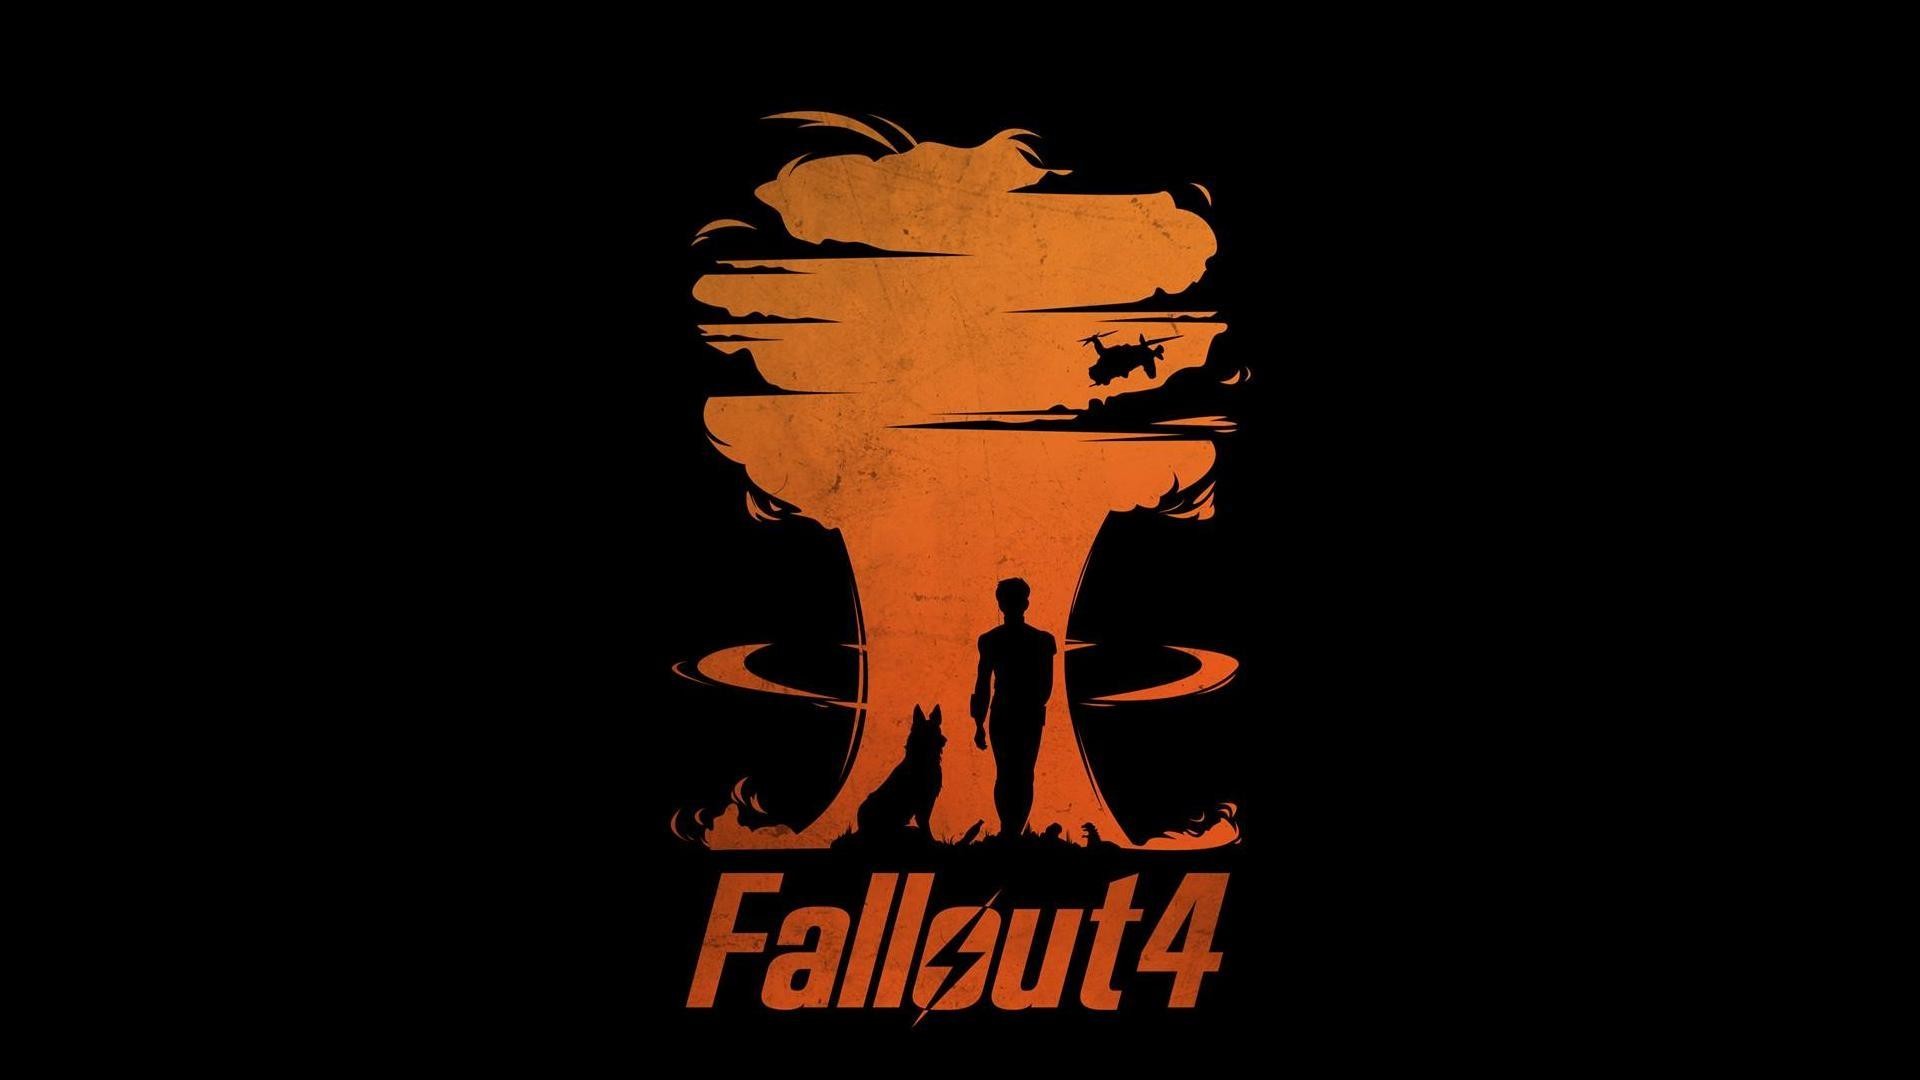 1920x1080 Fallout Please Stand By Wallpaper High Definition On Wallpaper Hd 1920 x  1080 px 623.08 KB